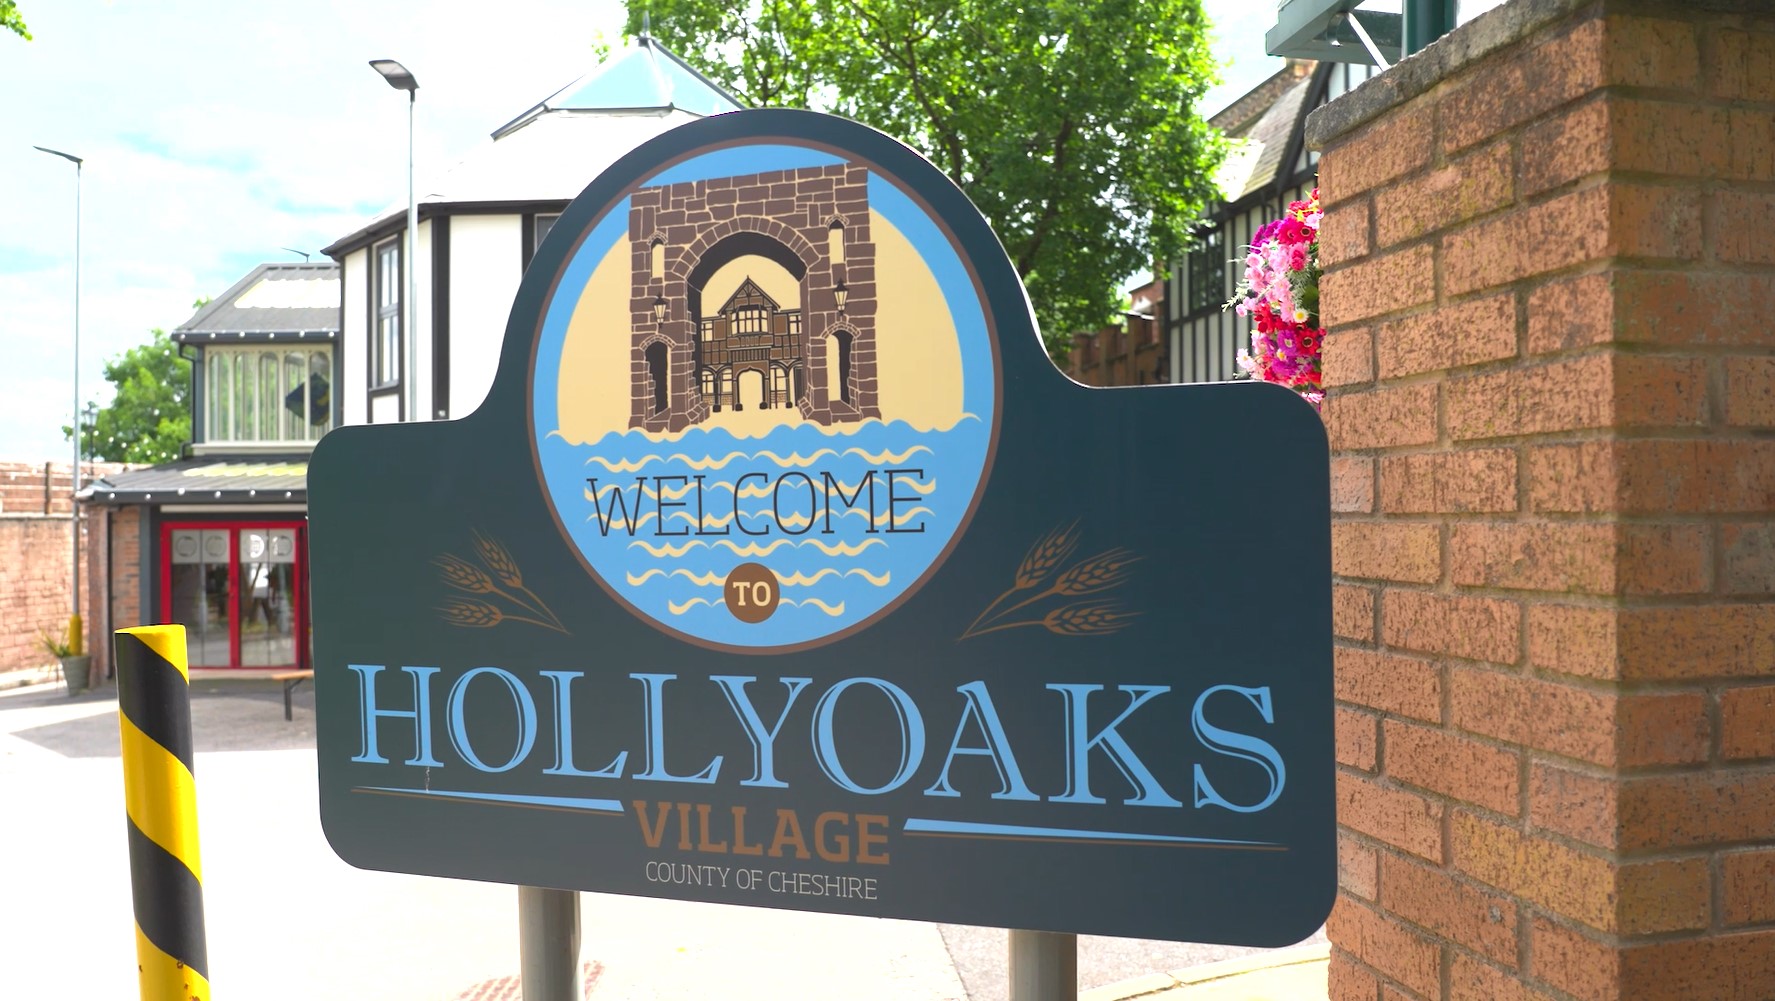 Listen in as Jess, our delivery facilitator, describes their trip to Hollyoaks.